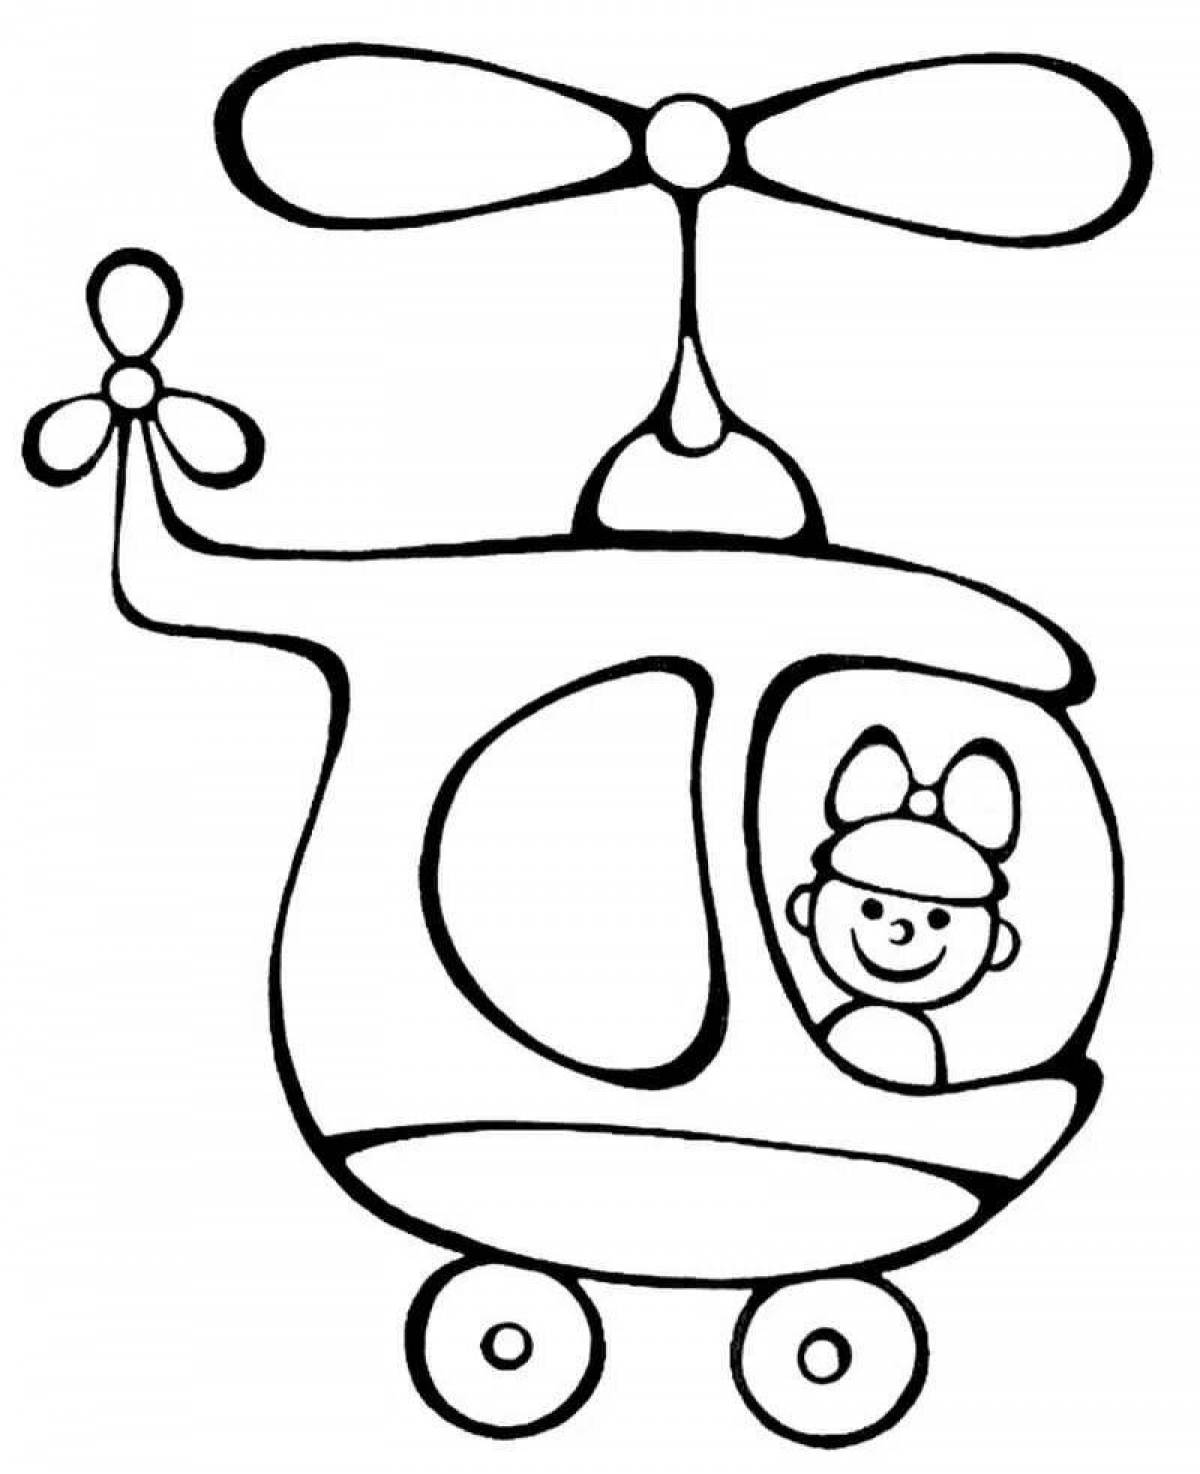 Adorable helicopter coloring book for preschoolers